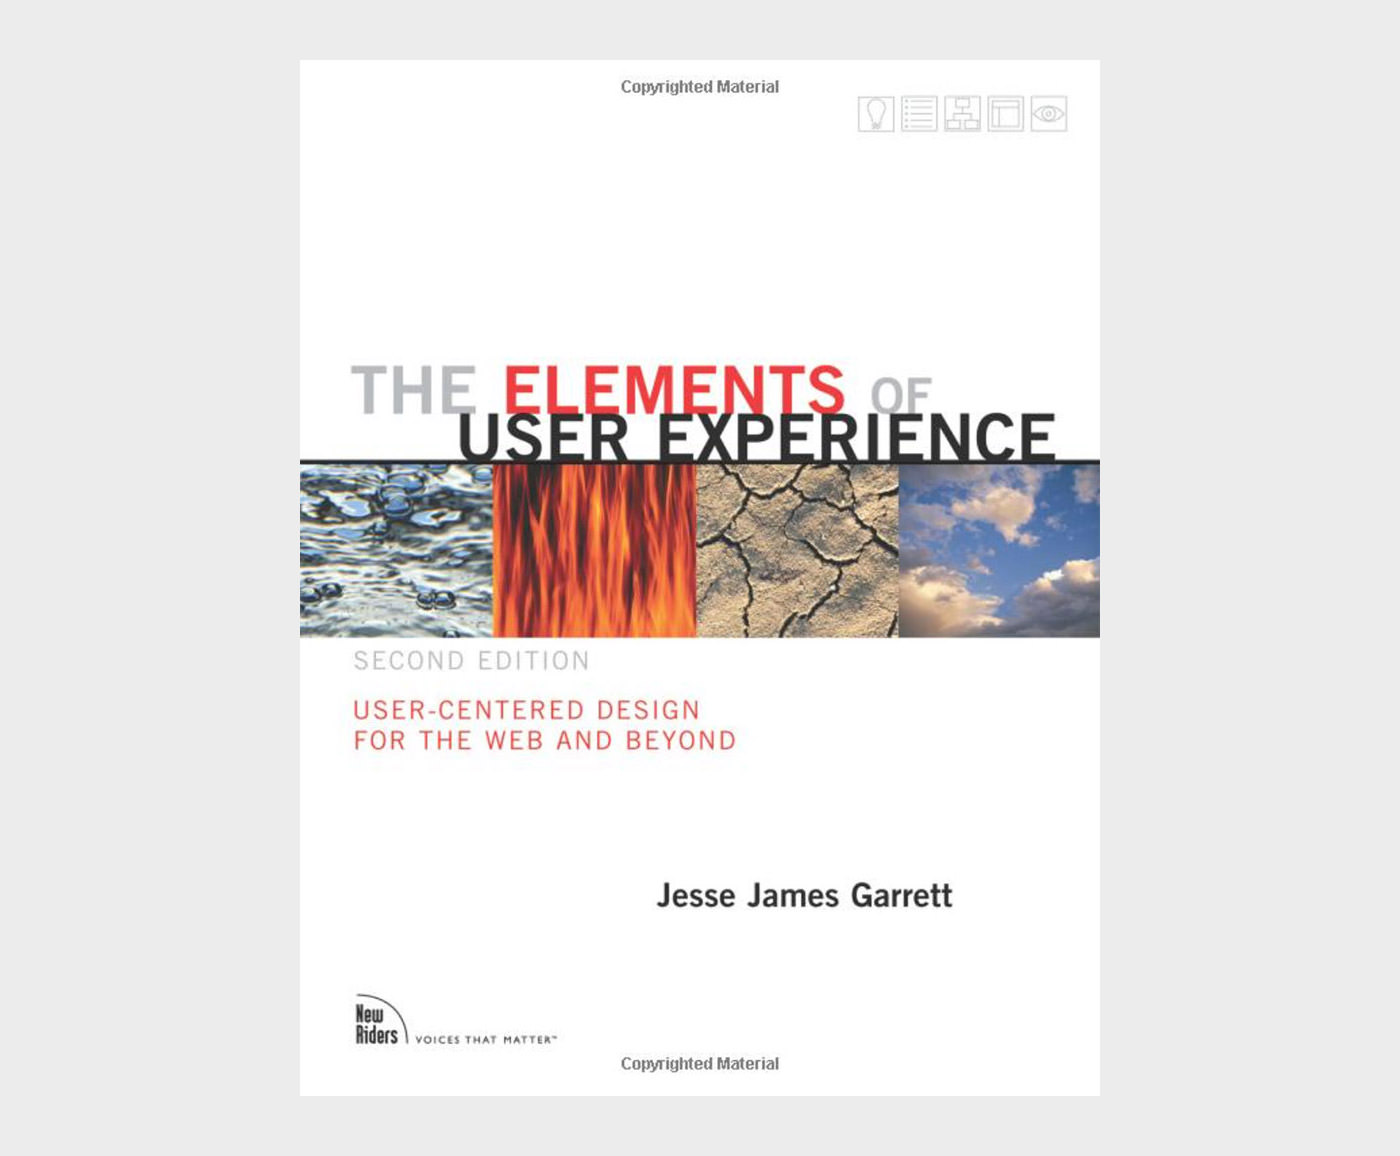 The Elements of User Experience: User-Centered Design for the Web